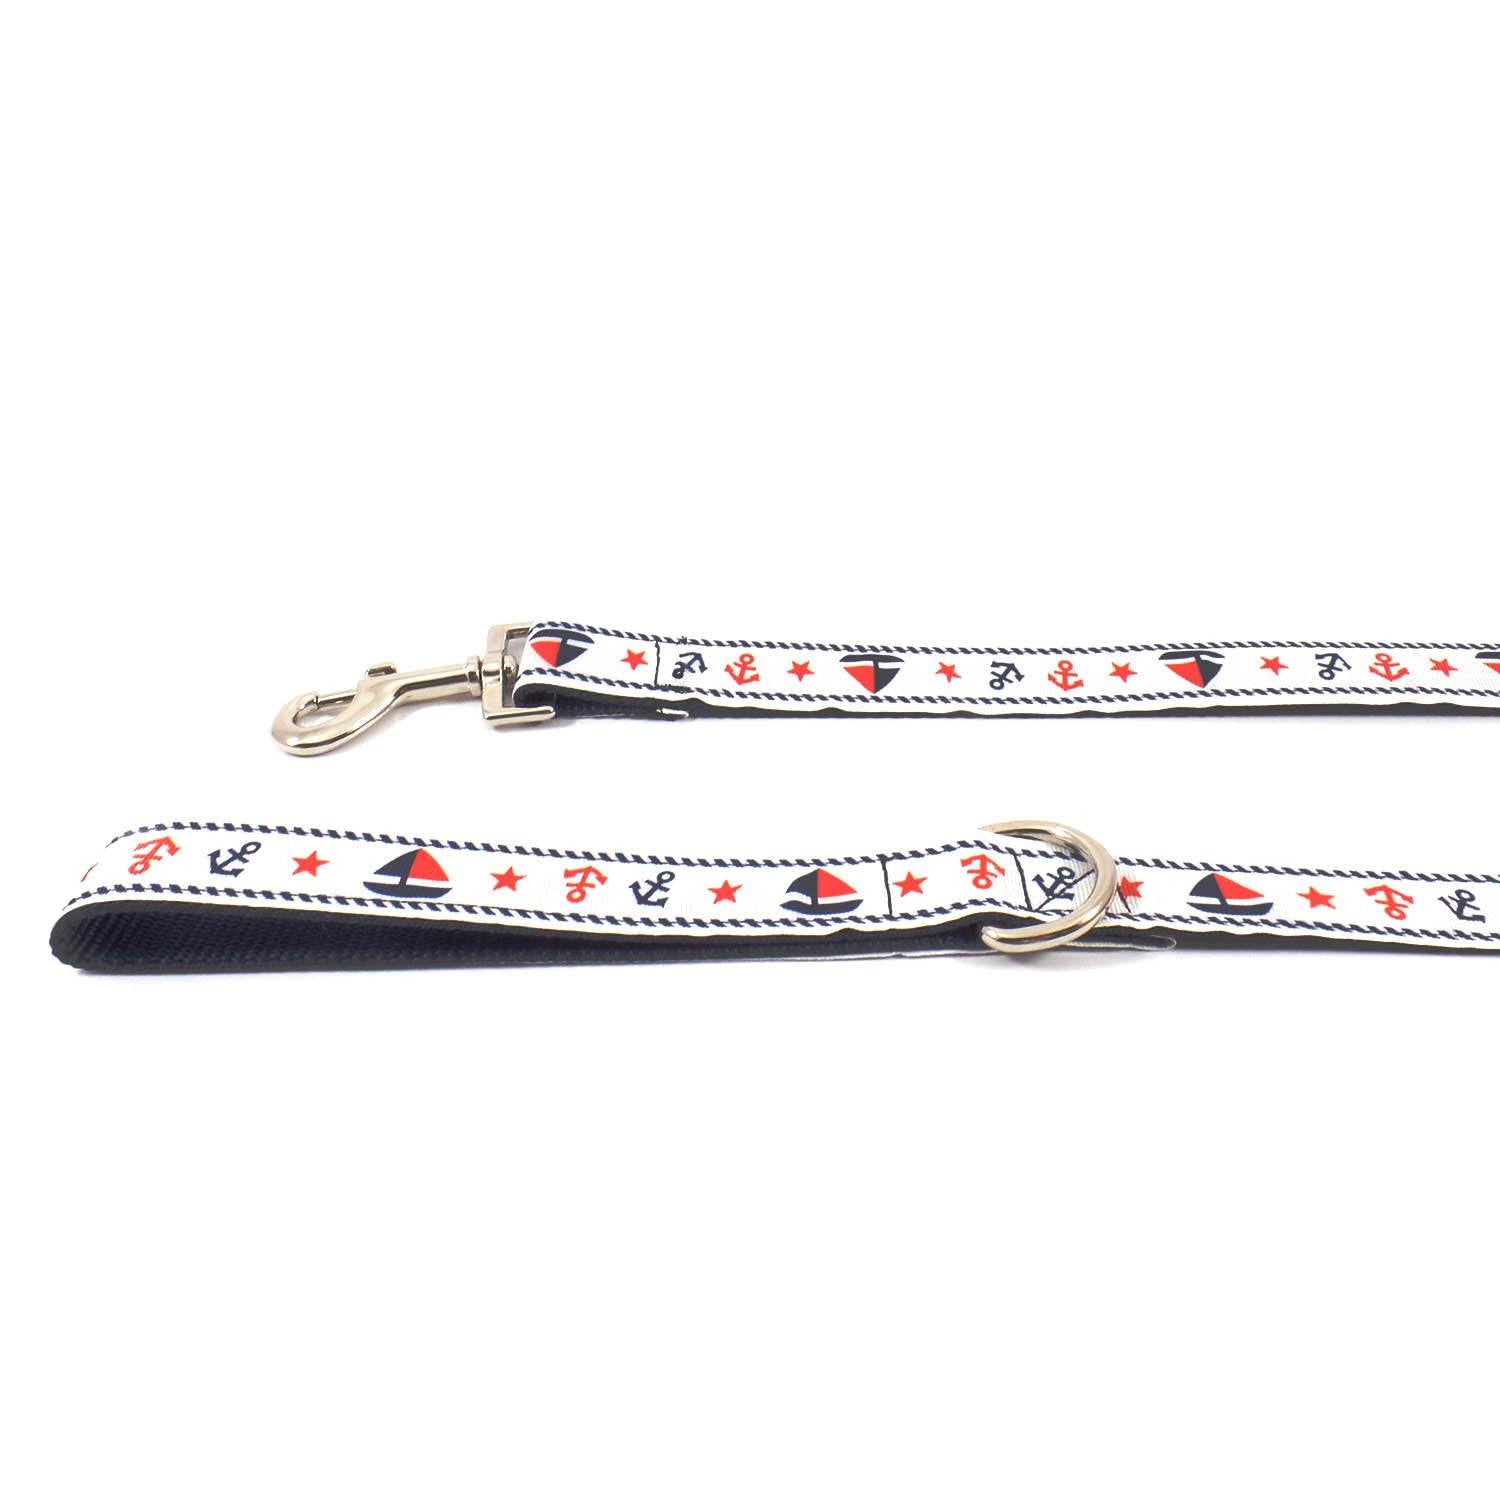 White with Boats and Anchors Leash - Beach & Dog Co.